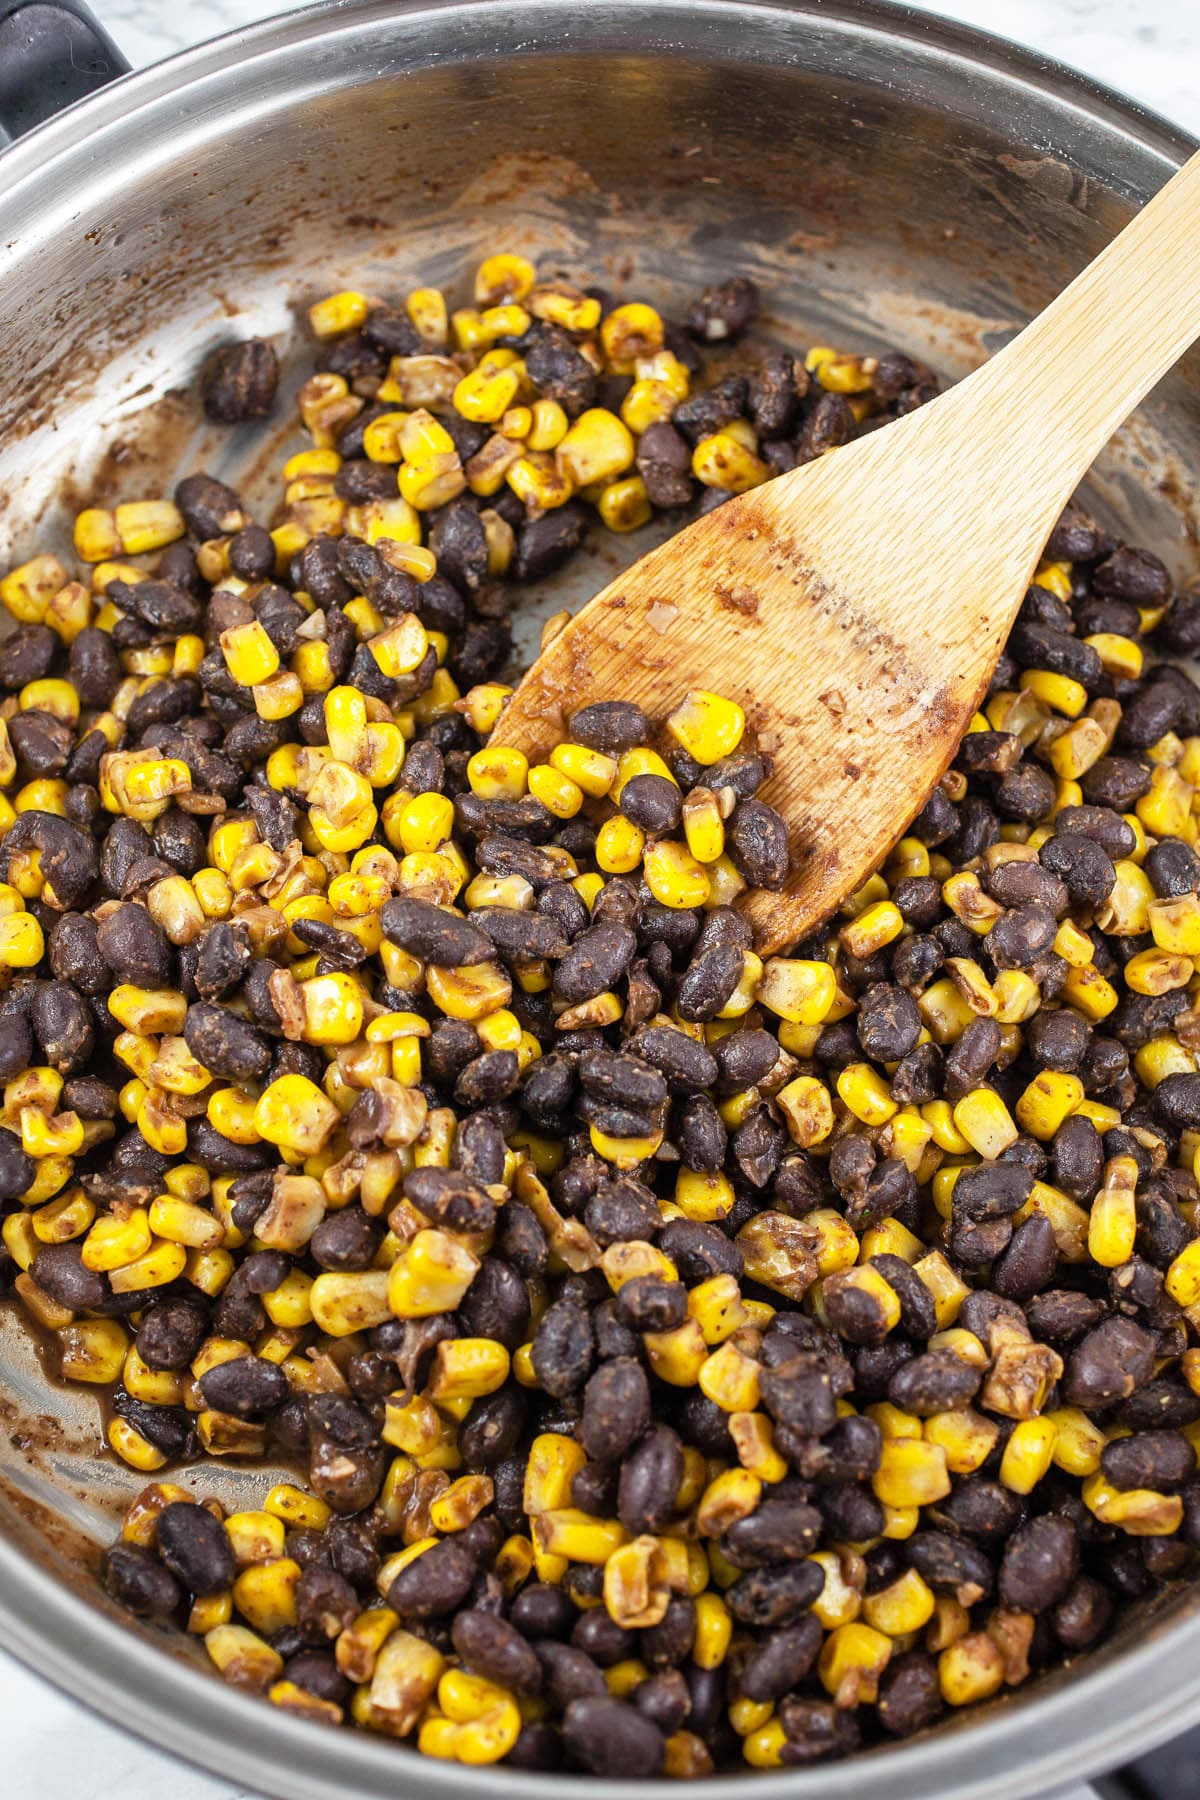 Black beans and corn sautéed in skillet with wooden spoon.